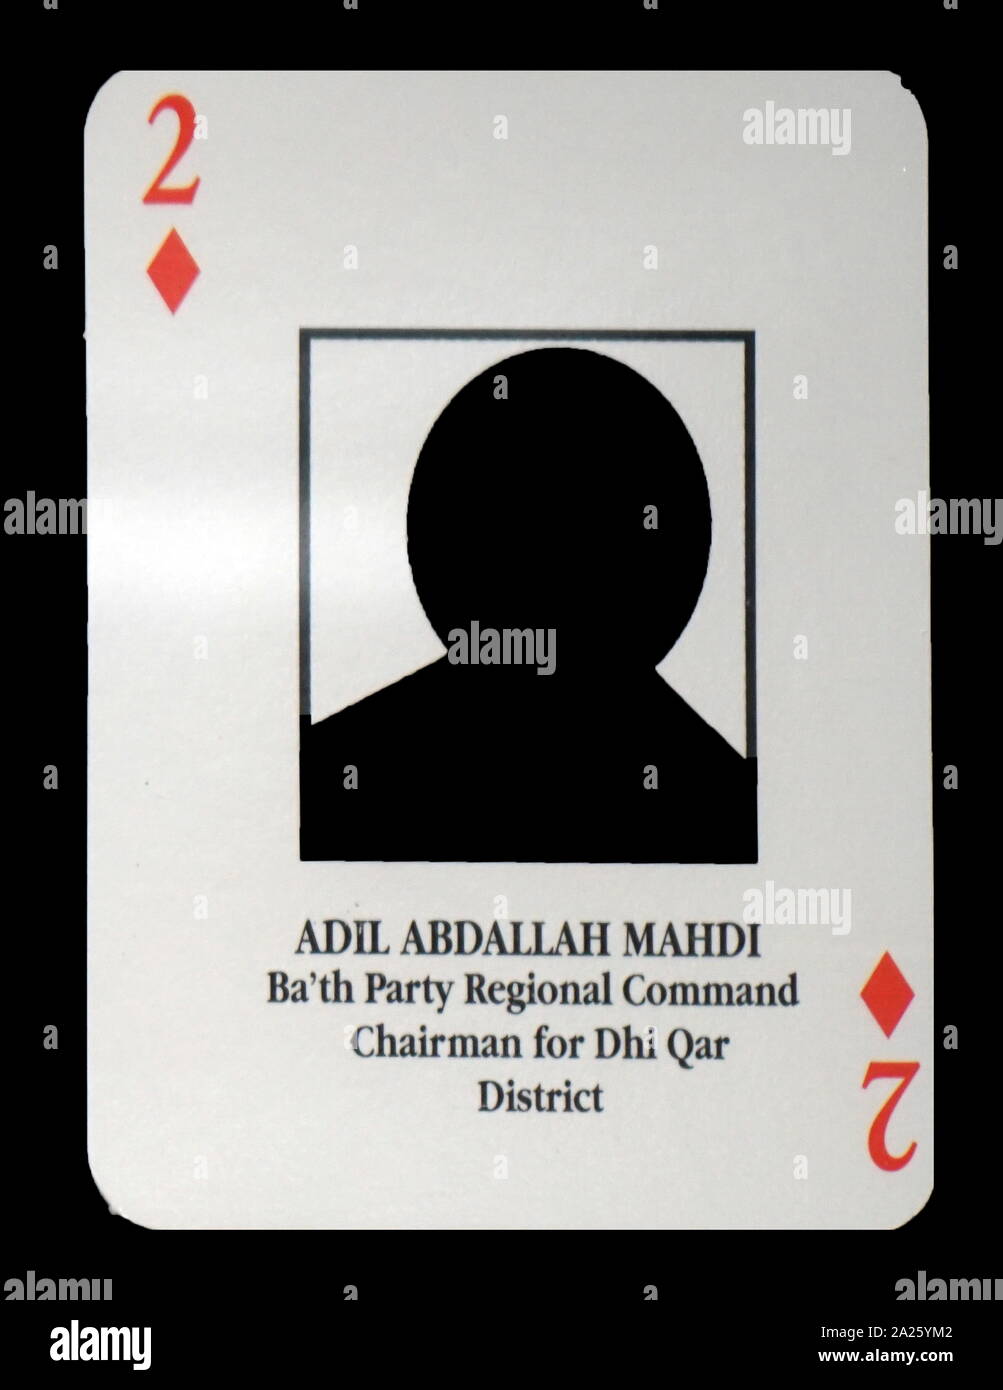 Most-wanted Iraqi playing cards - Adil Abdallah Mahdi (Ba'th Party Regional Command Chairman for Dhi Qar District). The U.S. military developed a set of playing cards to help troop identify the most-wanted members of President Saddam Hussein's government during the 2003 invasion of Iraq. Stock Photo